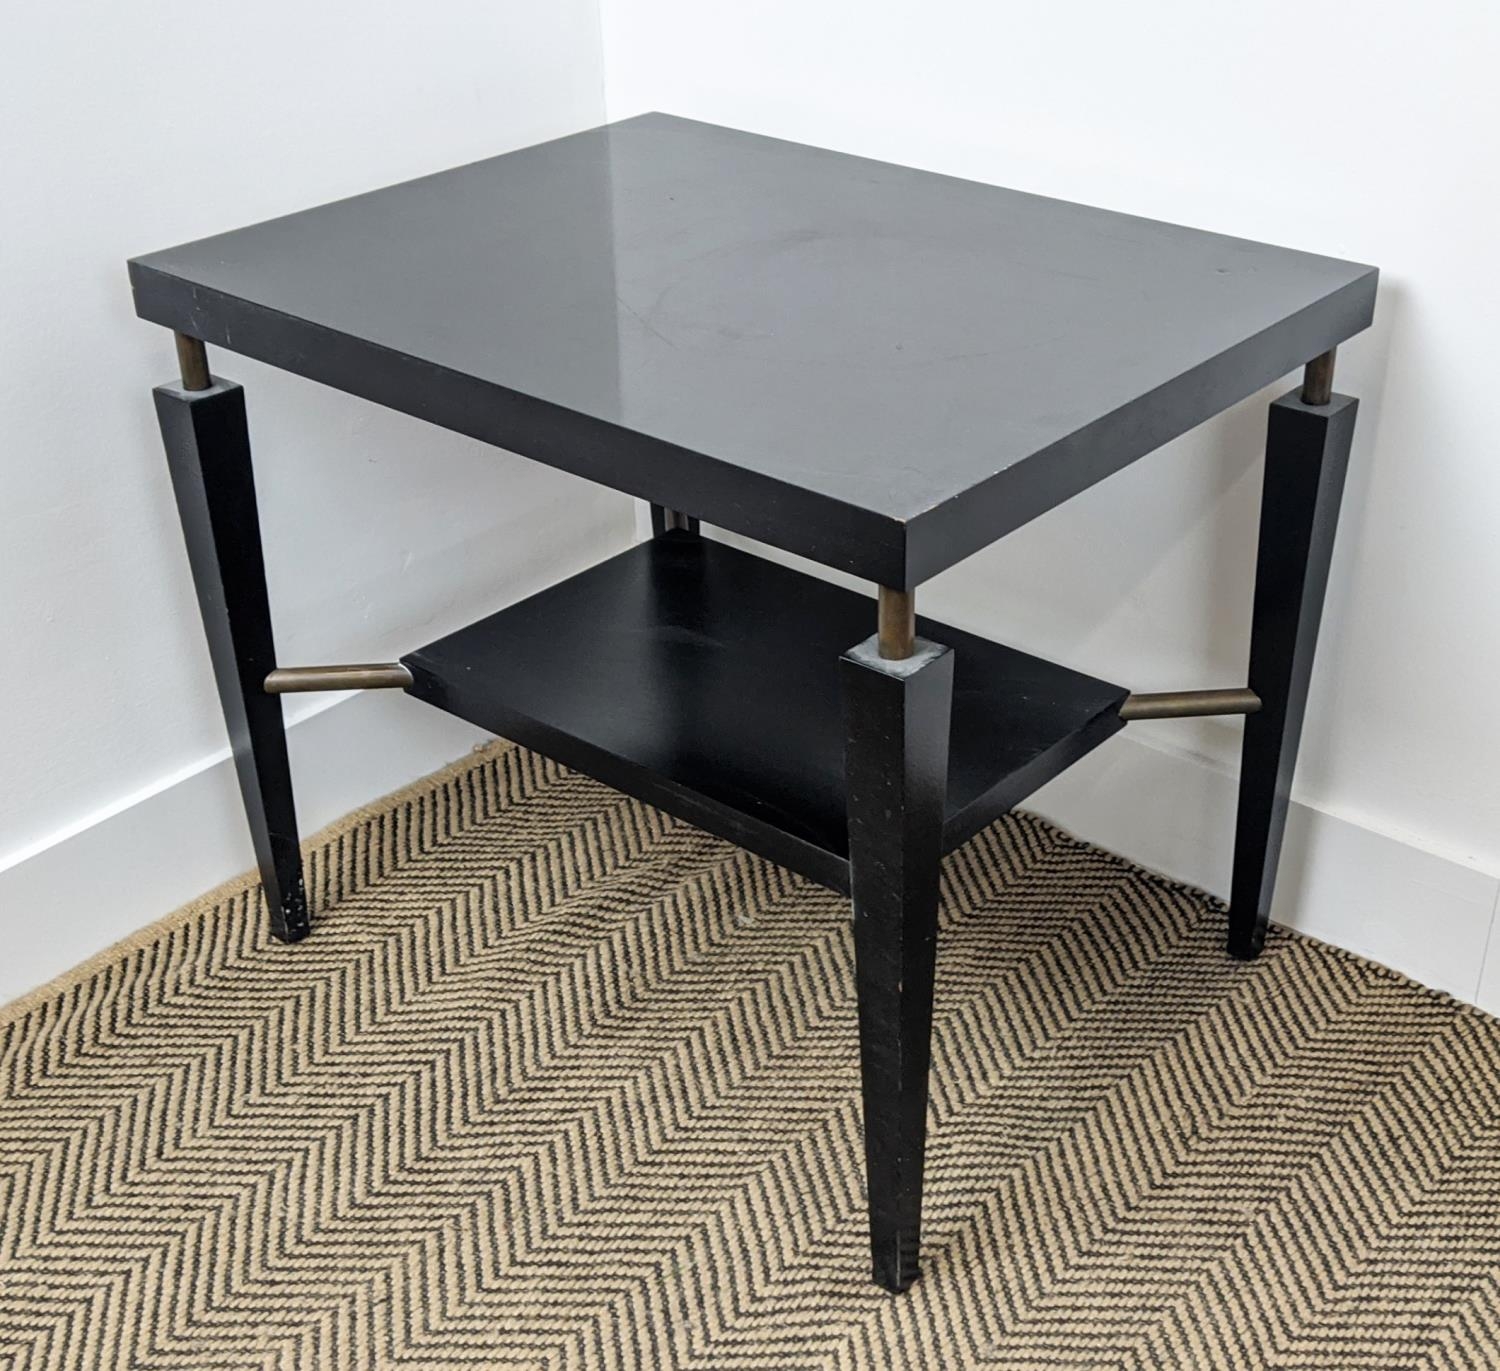 SIDE TABLE, reputedly by Paulo Moschino, 65cm W x 50cm D in an ebonised finish. - Image 2 of 6